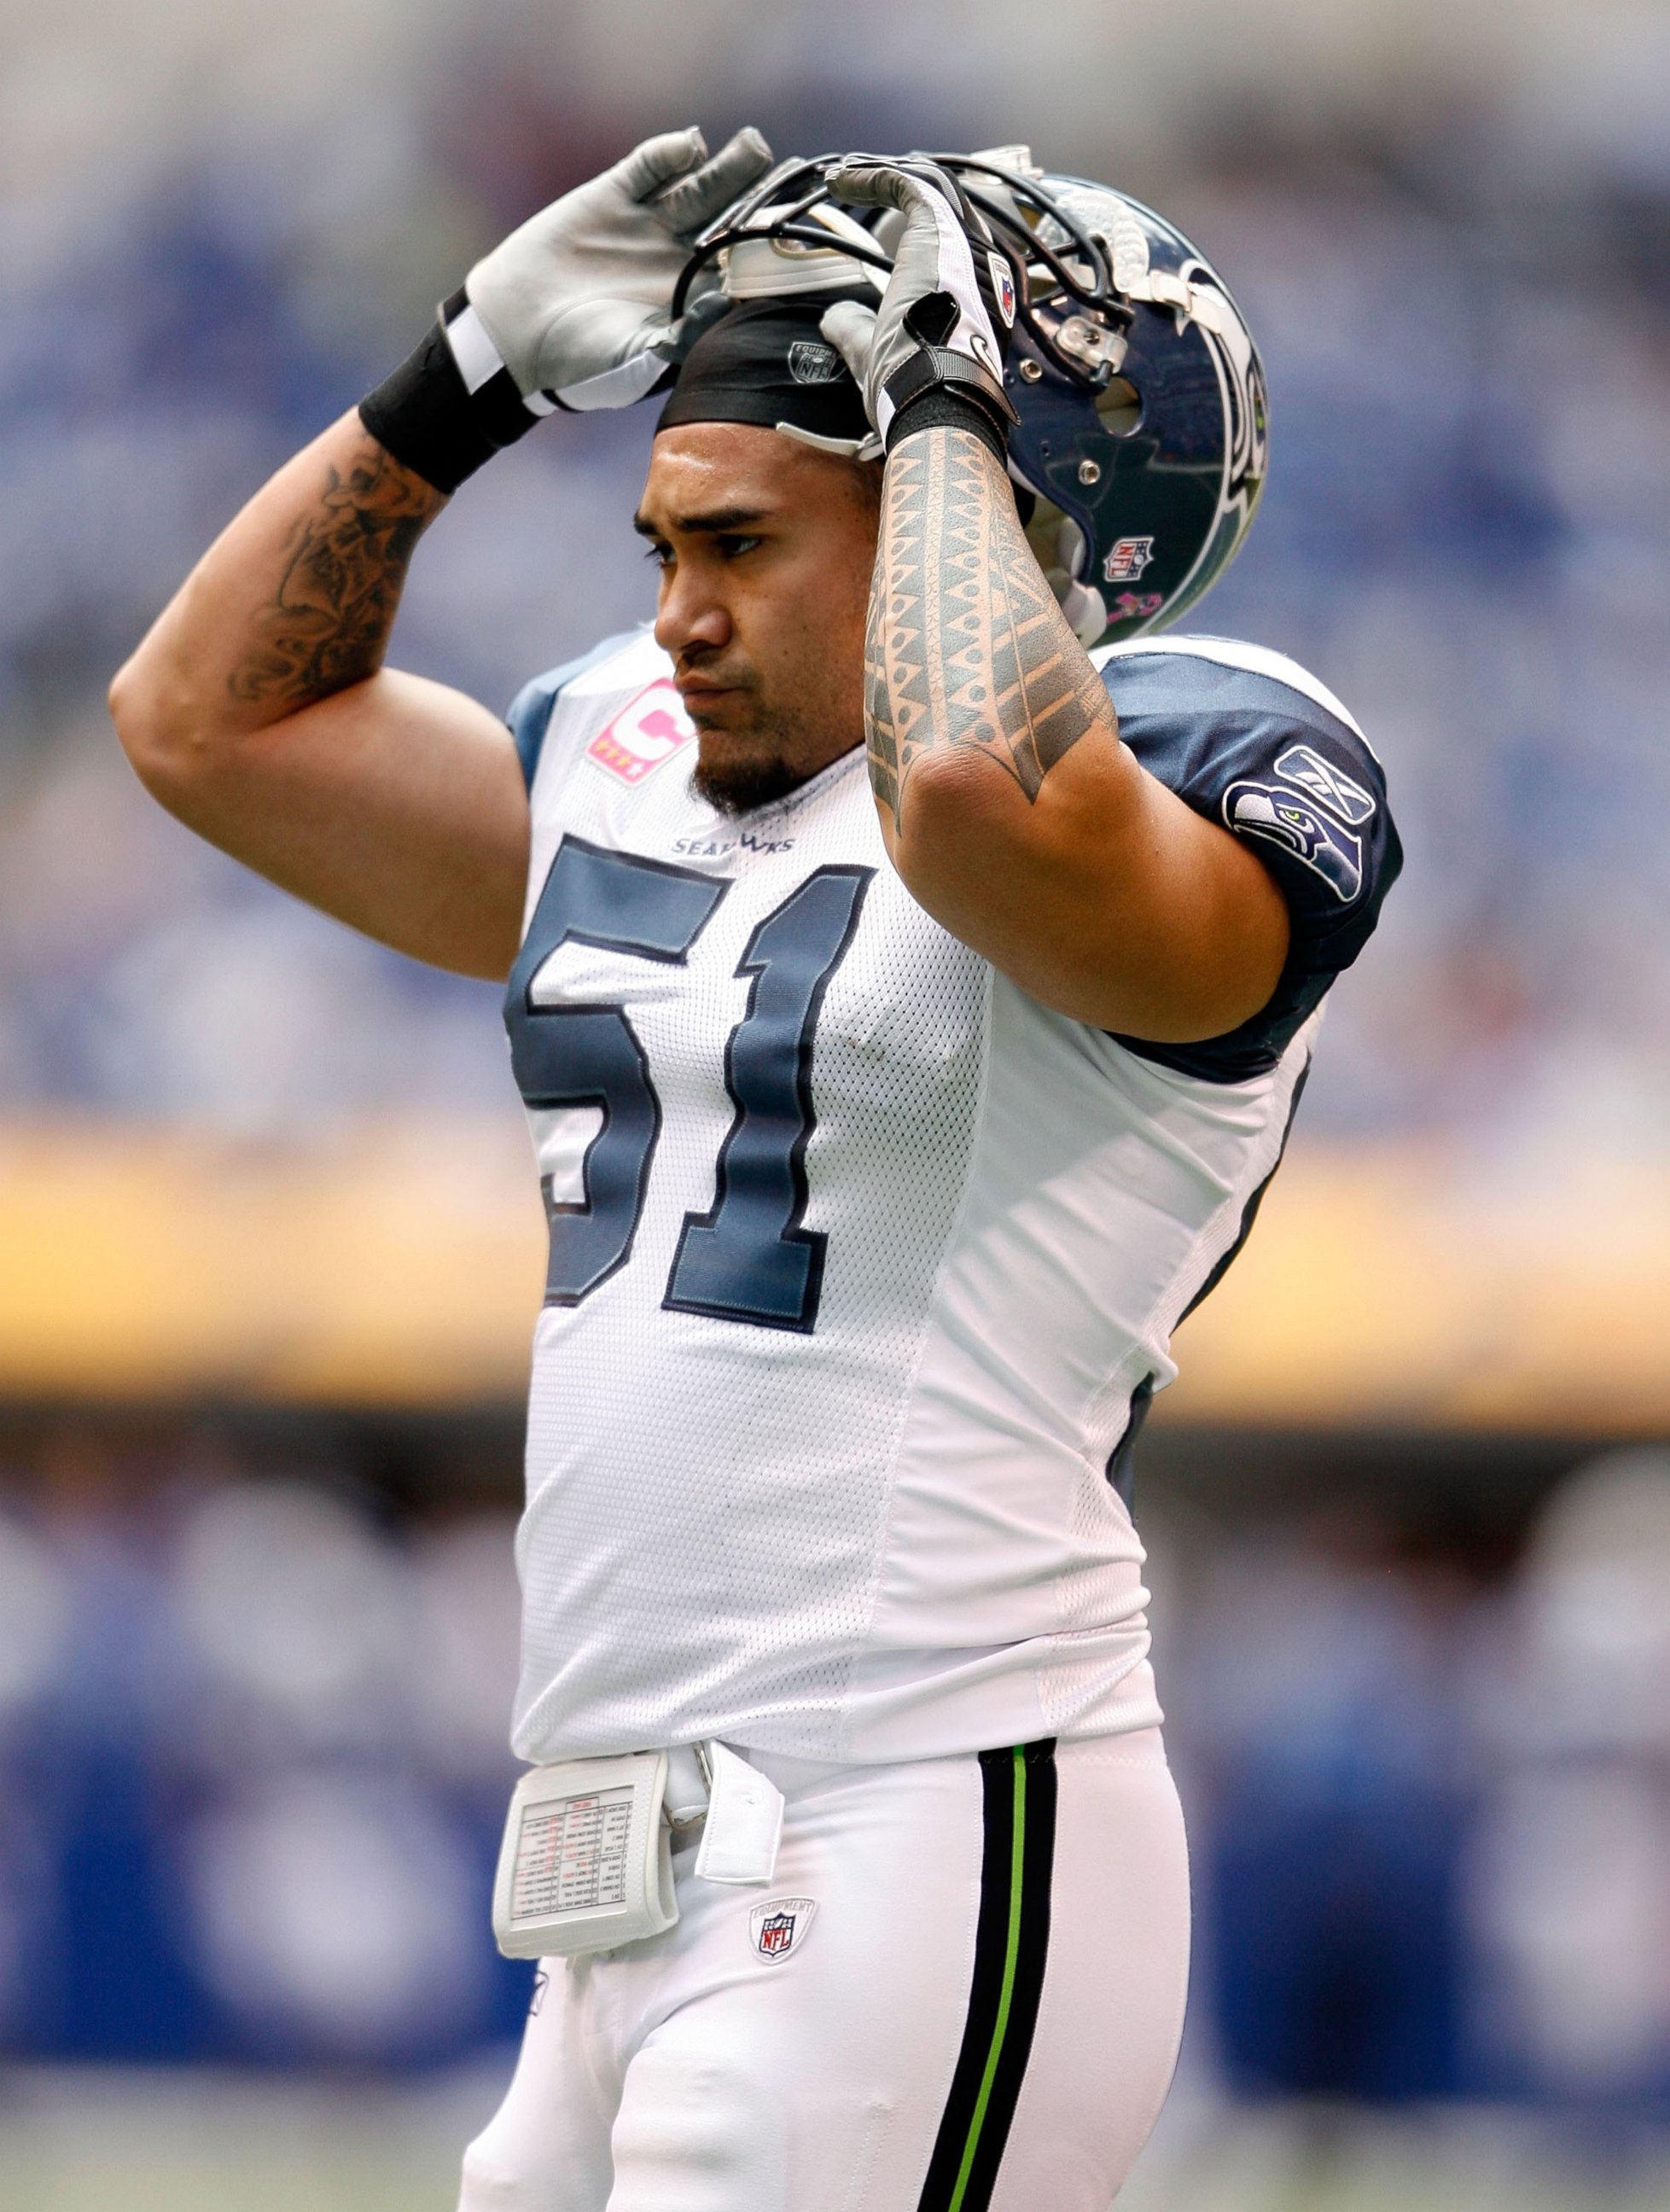 PHOTO: Lofa Tatupu of the the Seattle Seahawks during the NFL game against the Indianapolis Colts on October 4, 2009 in Indianapolis, Indiana. 